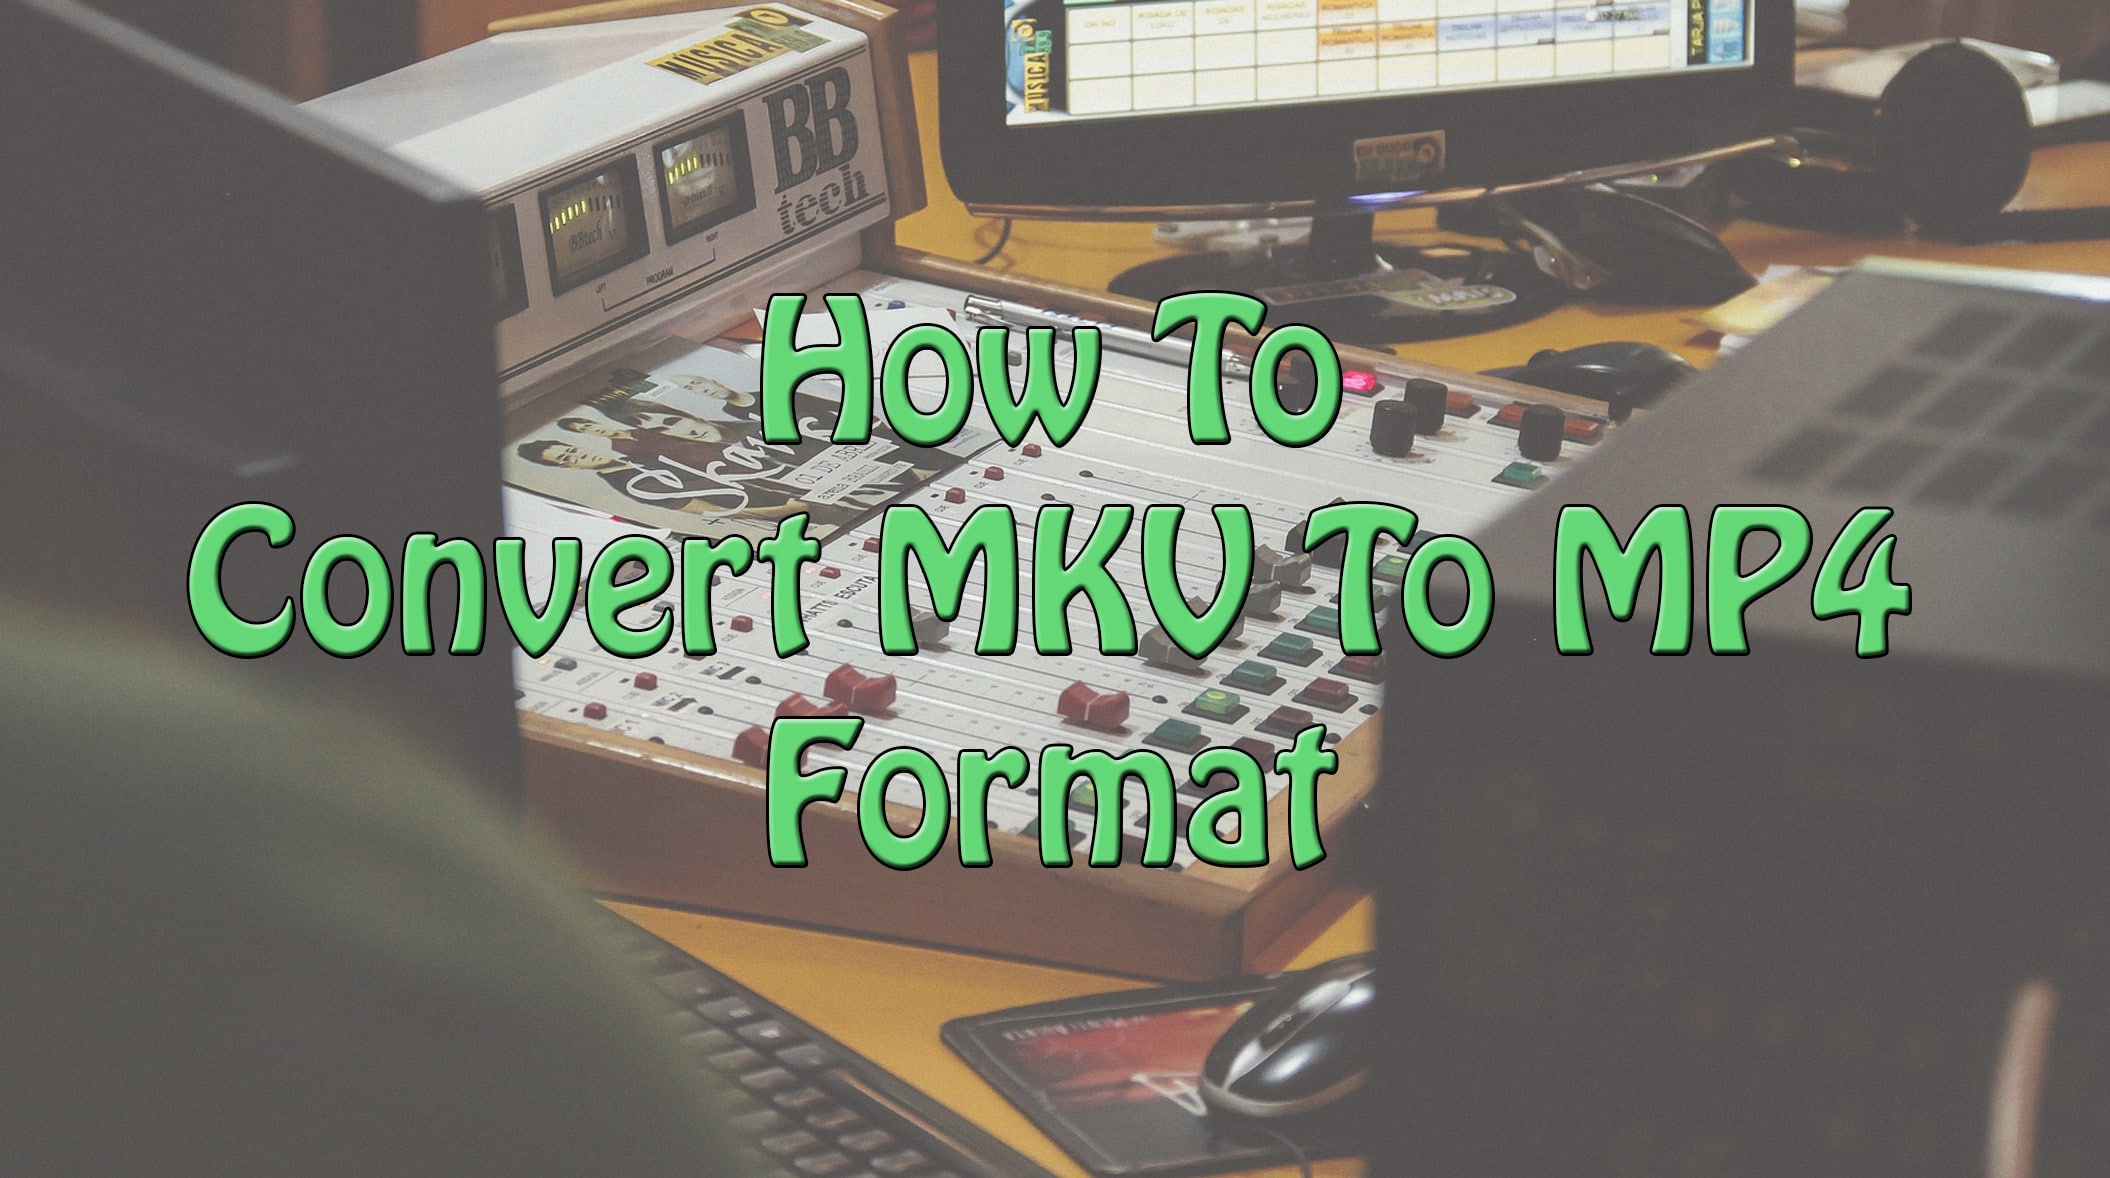 How To Convert MKV To MP4